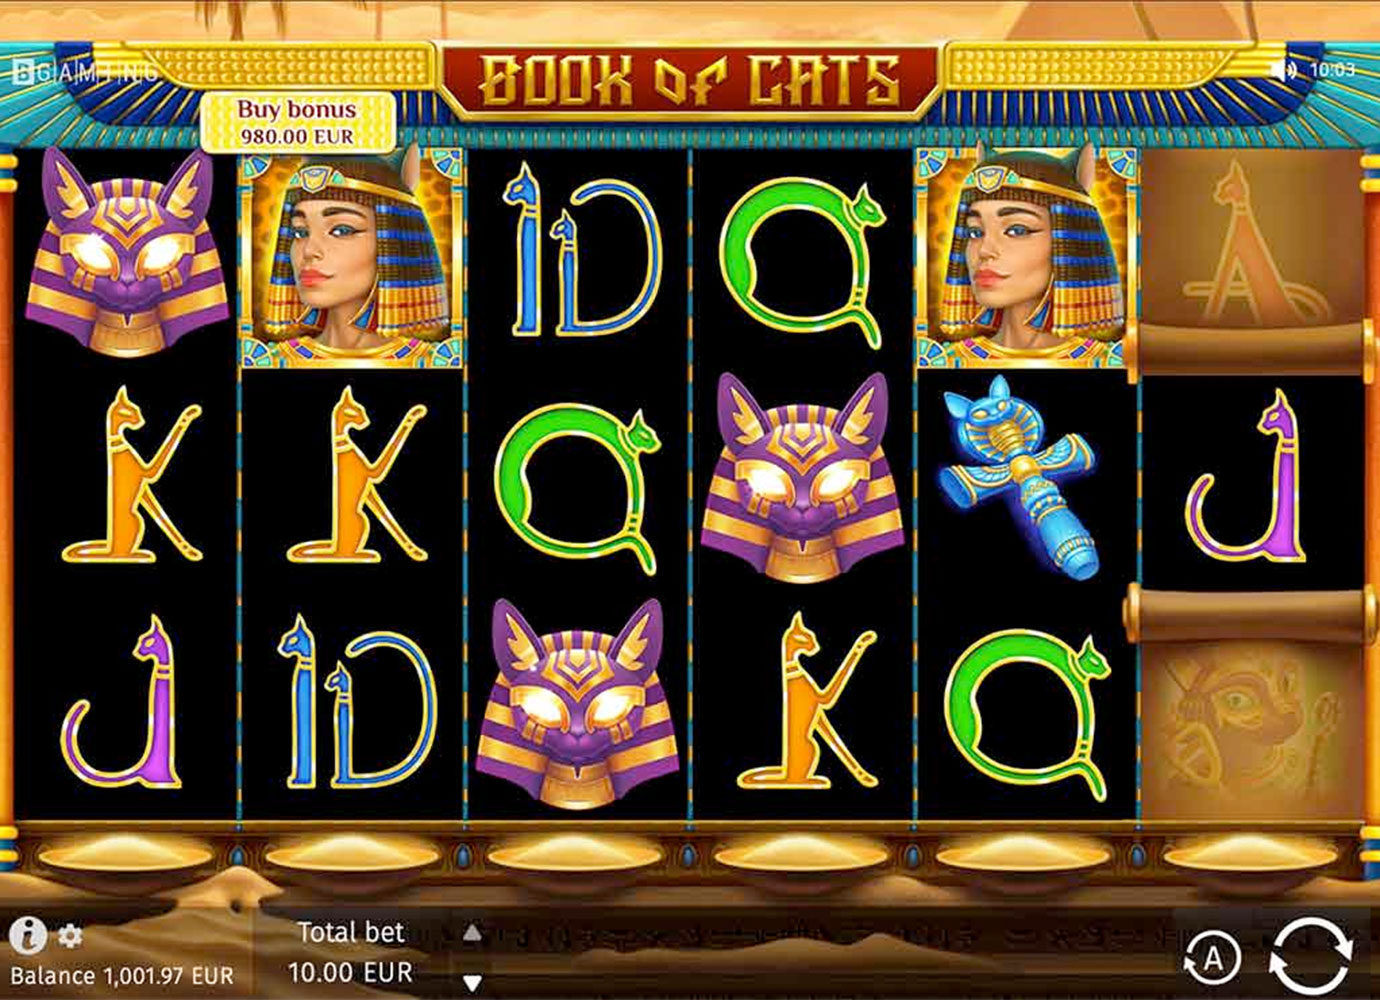 Book of Cats Slot